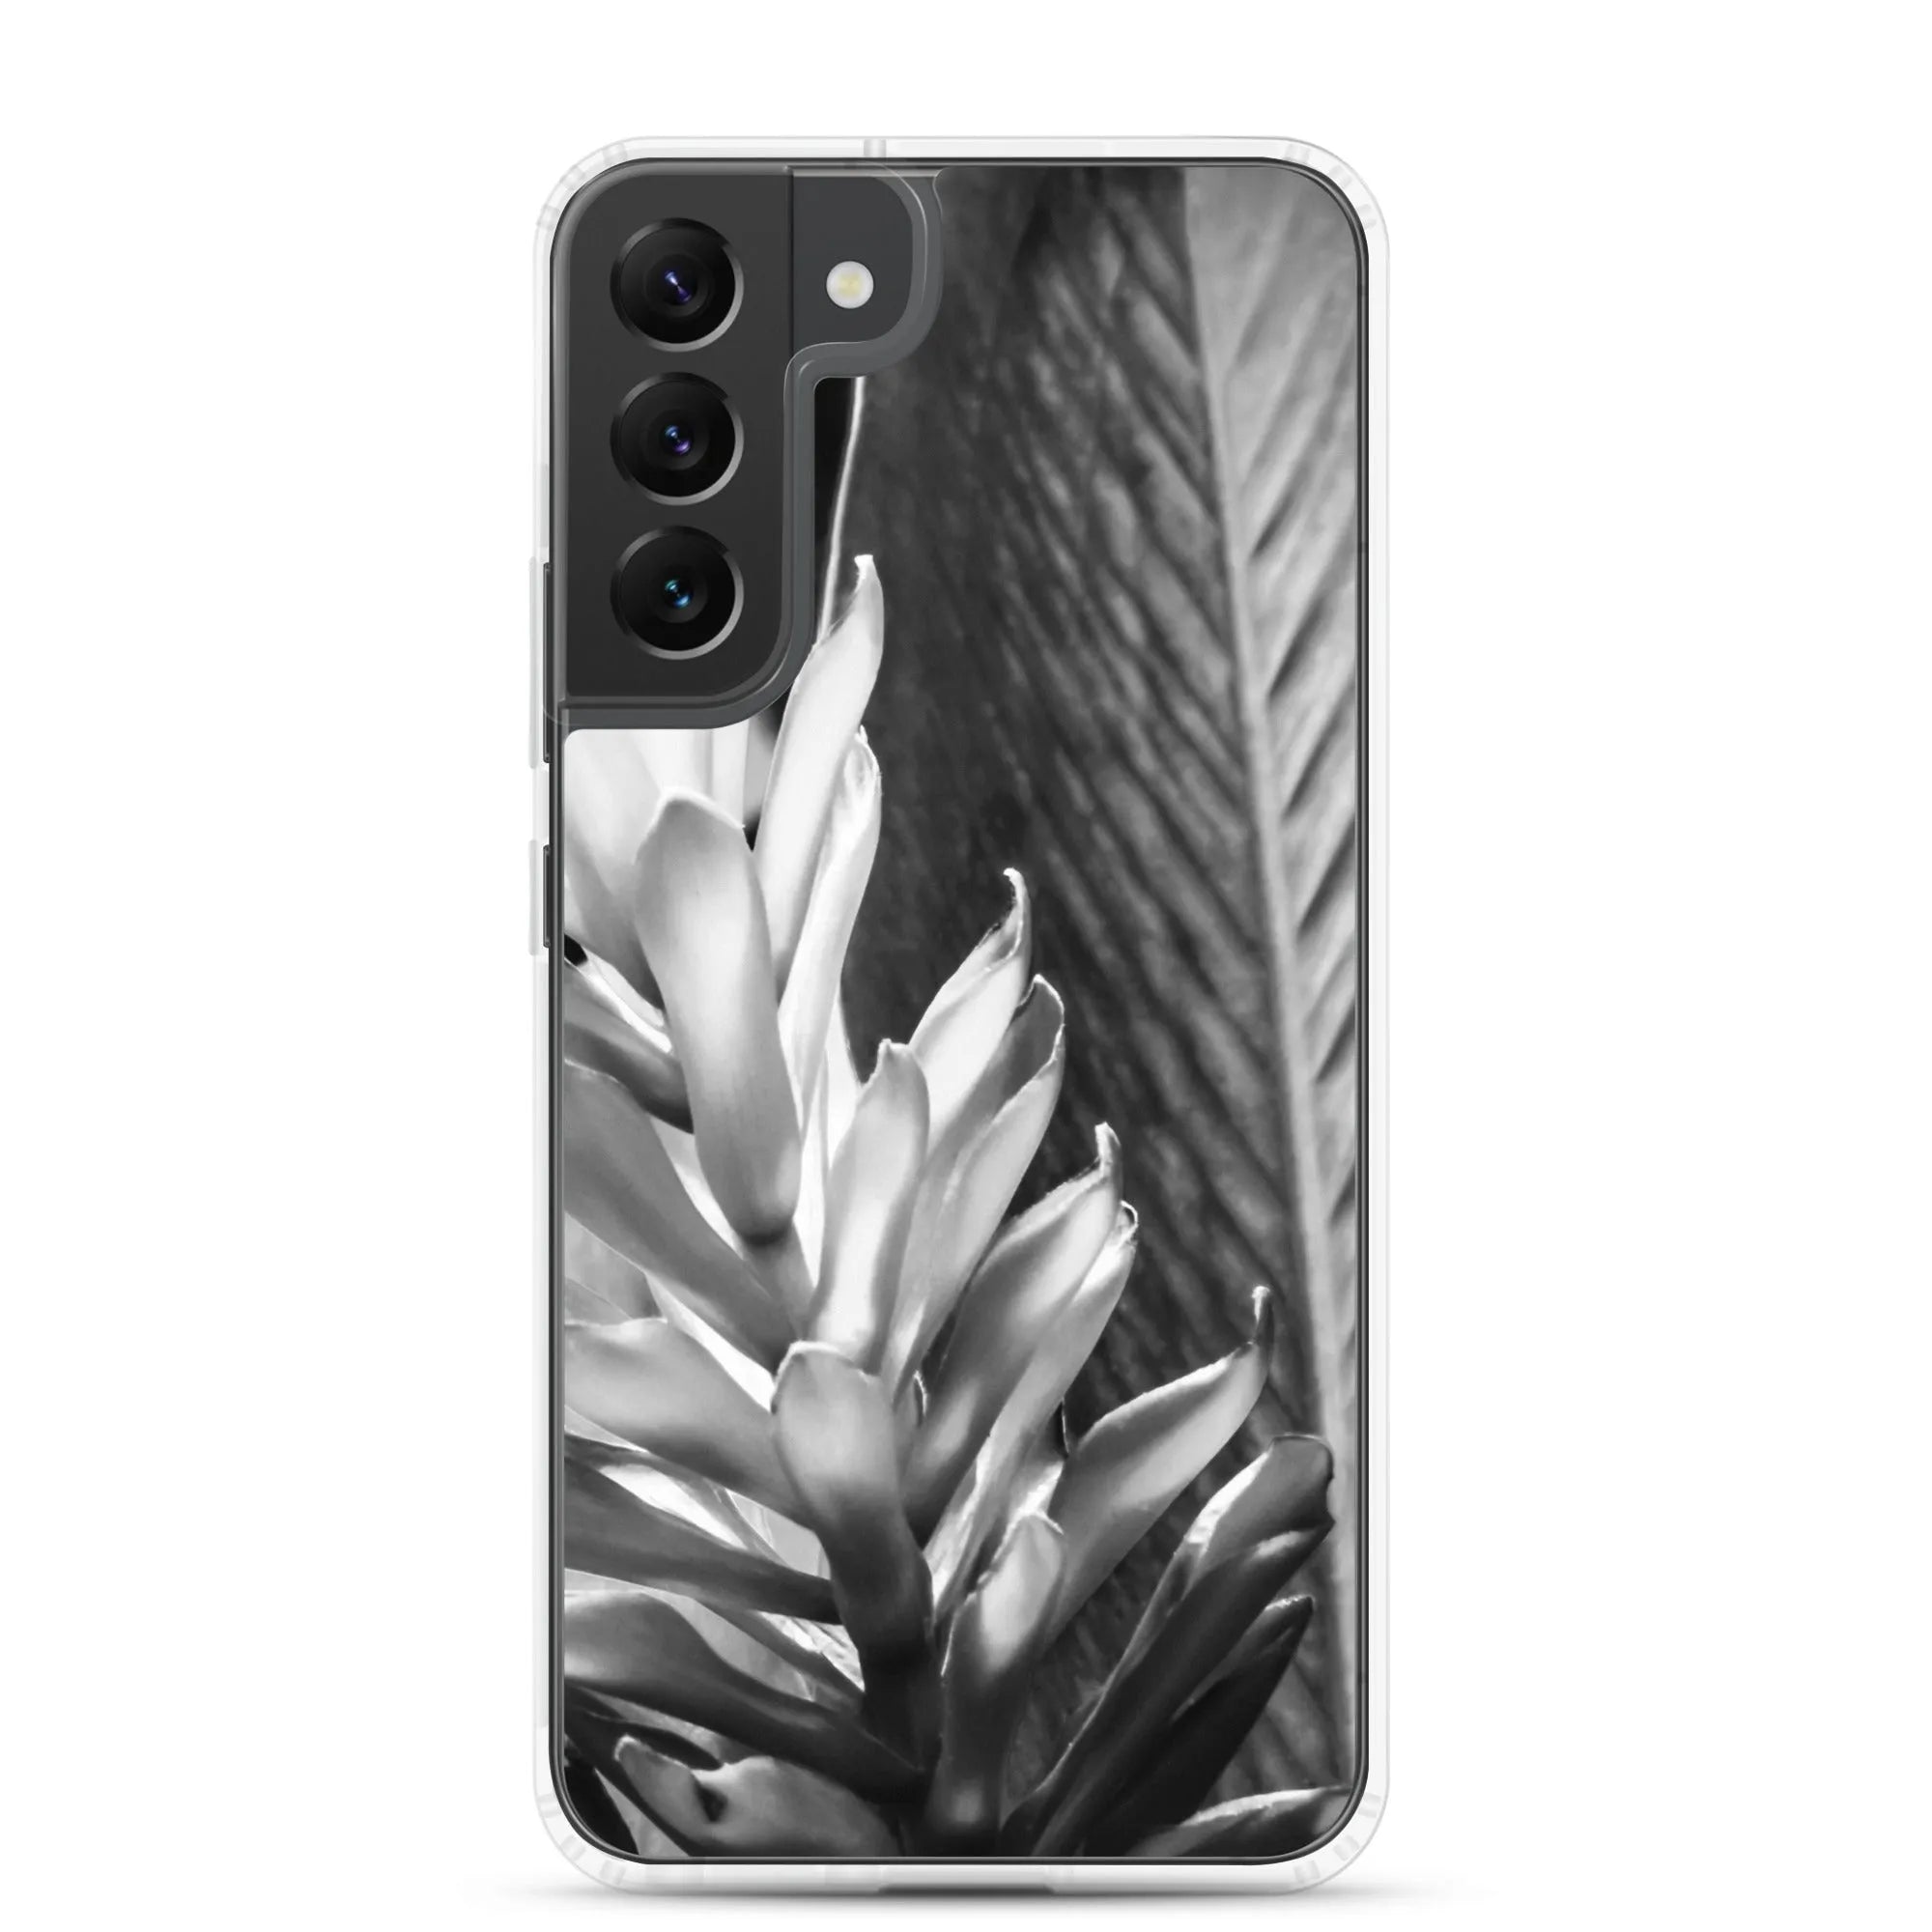 Siren Samsung Galaxy Case - Black And White - Samsung Galaxy S22 Plus - Mobile Phone Cases - Aesthetic Art